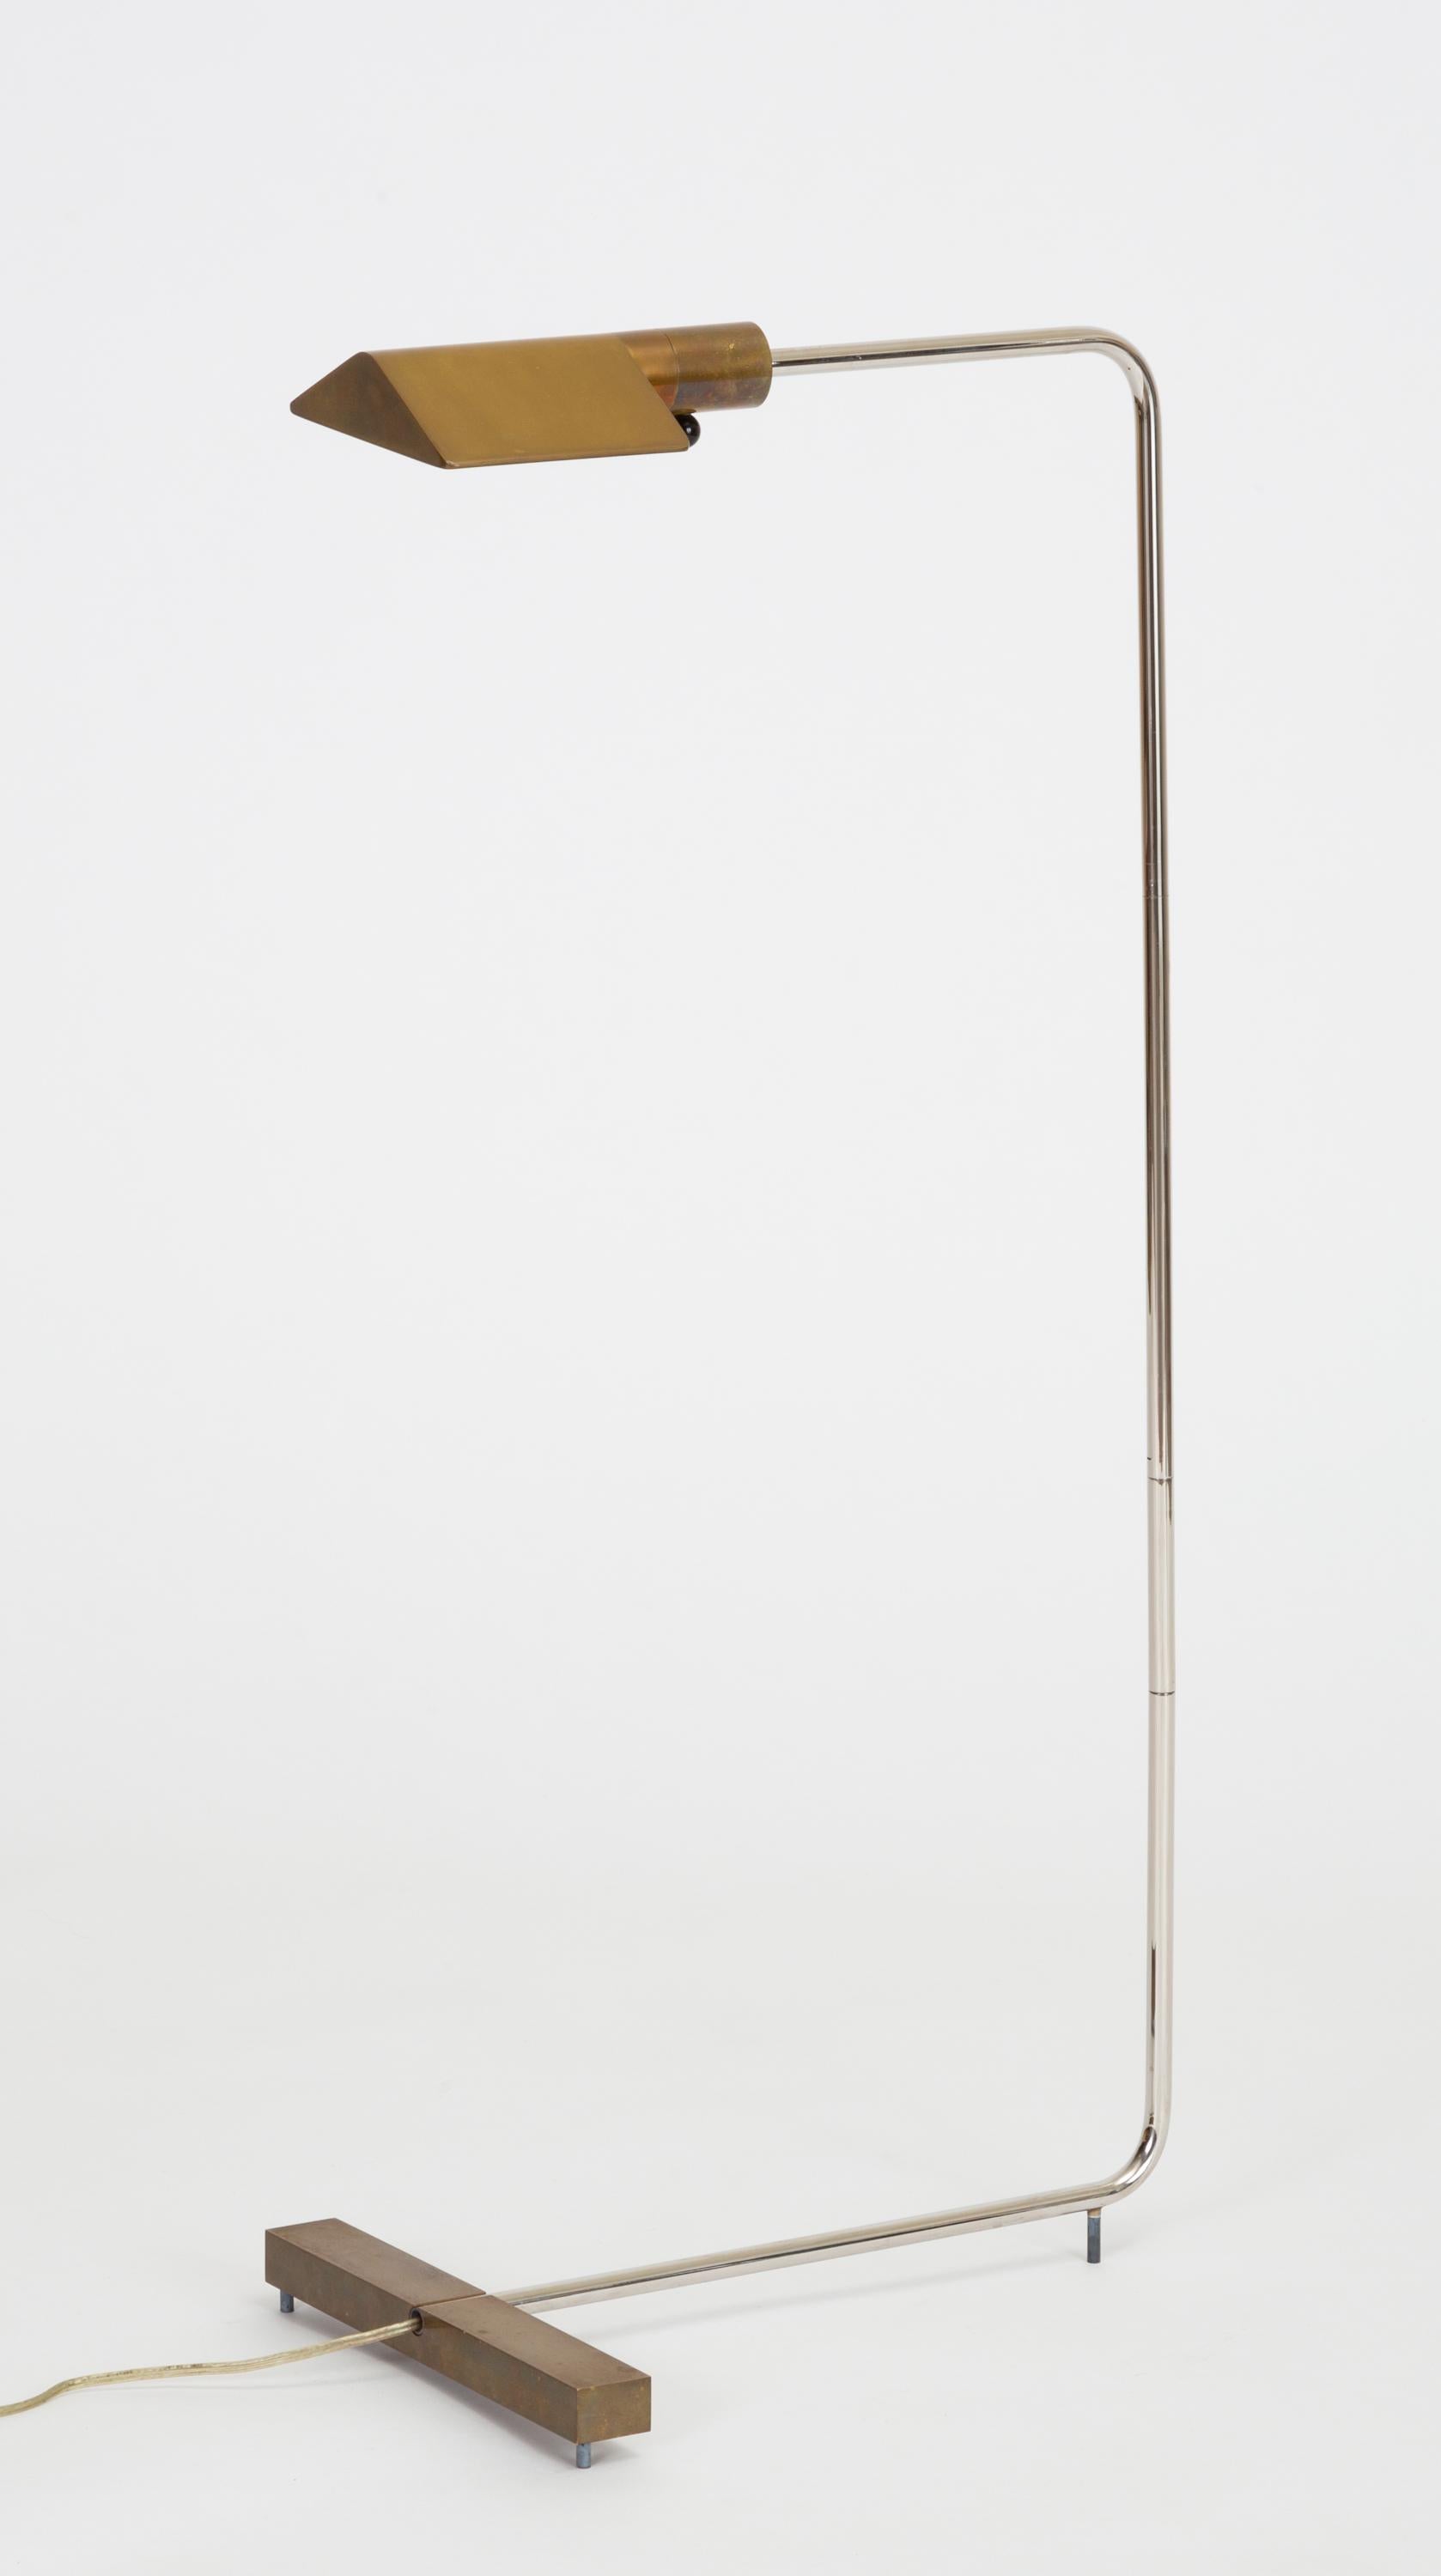 Designed in 1966, the 1UWV floor lamp by Cedric Hartman is an enduring design classic. A modernist take on the pharmacy lamp, the 1UWV has a triangular brass shade on a swiveling arm that offers focused task lighting. The cantilevered chrome pole